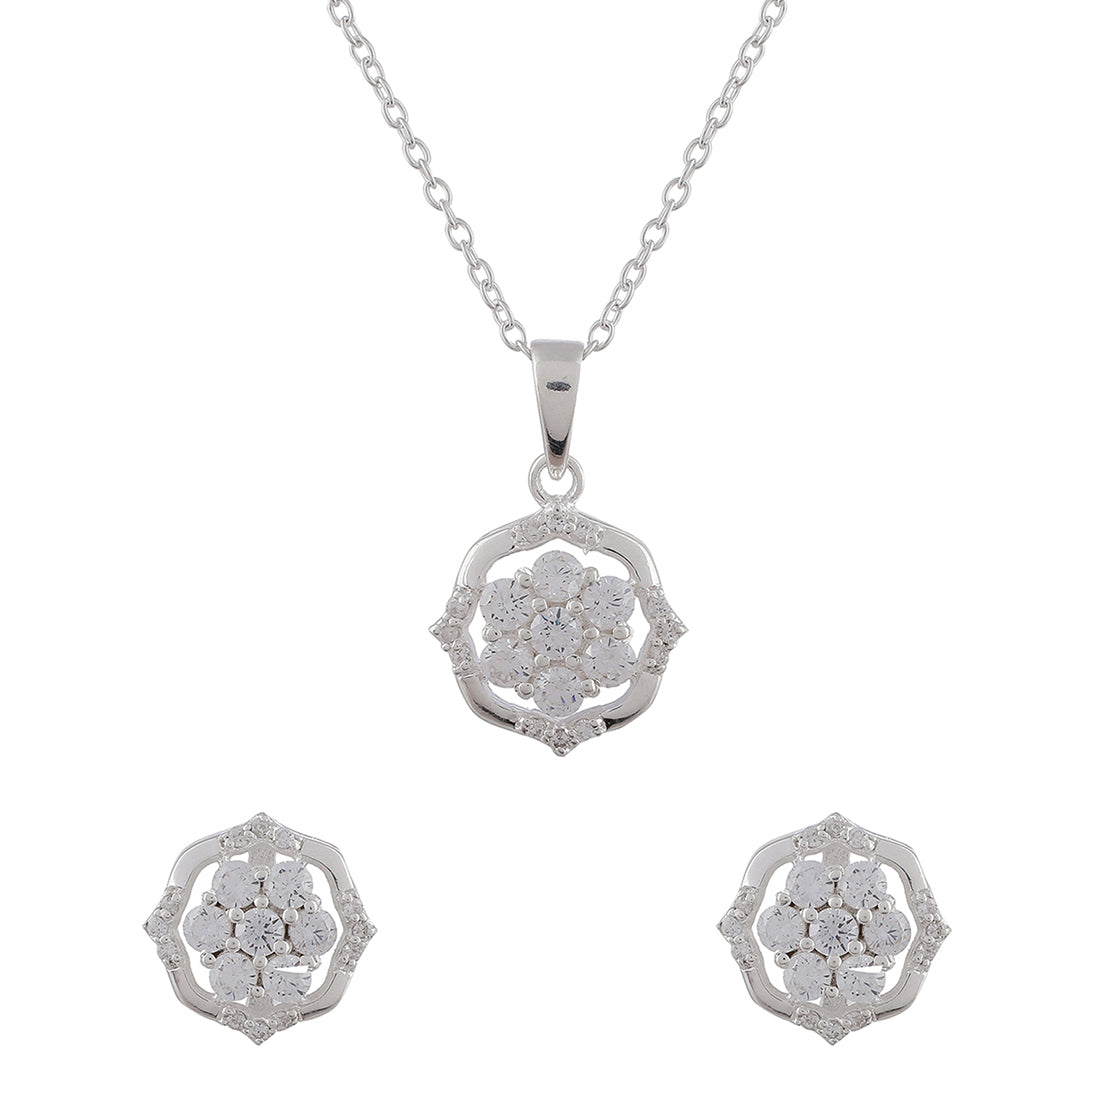 Women's 925 Sterling Silver Pendant Set With Shiny Cubic Zironia - Voylla